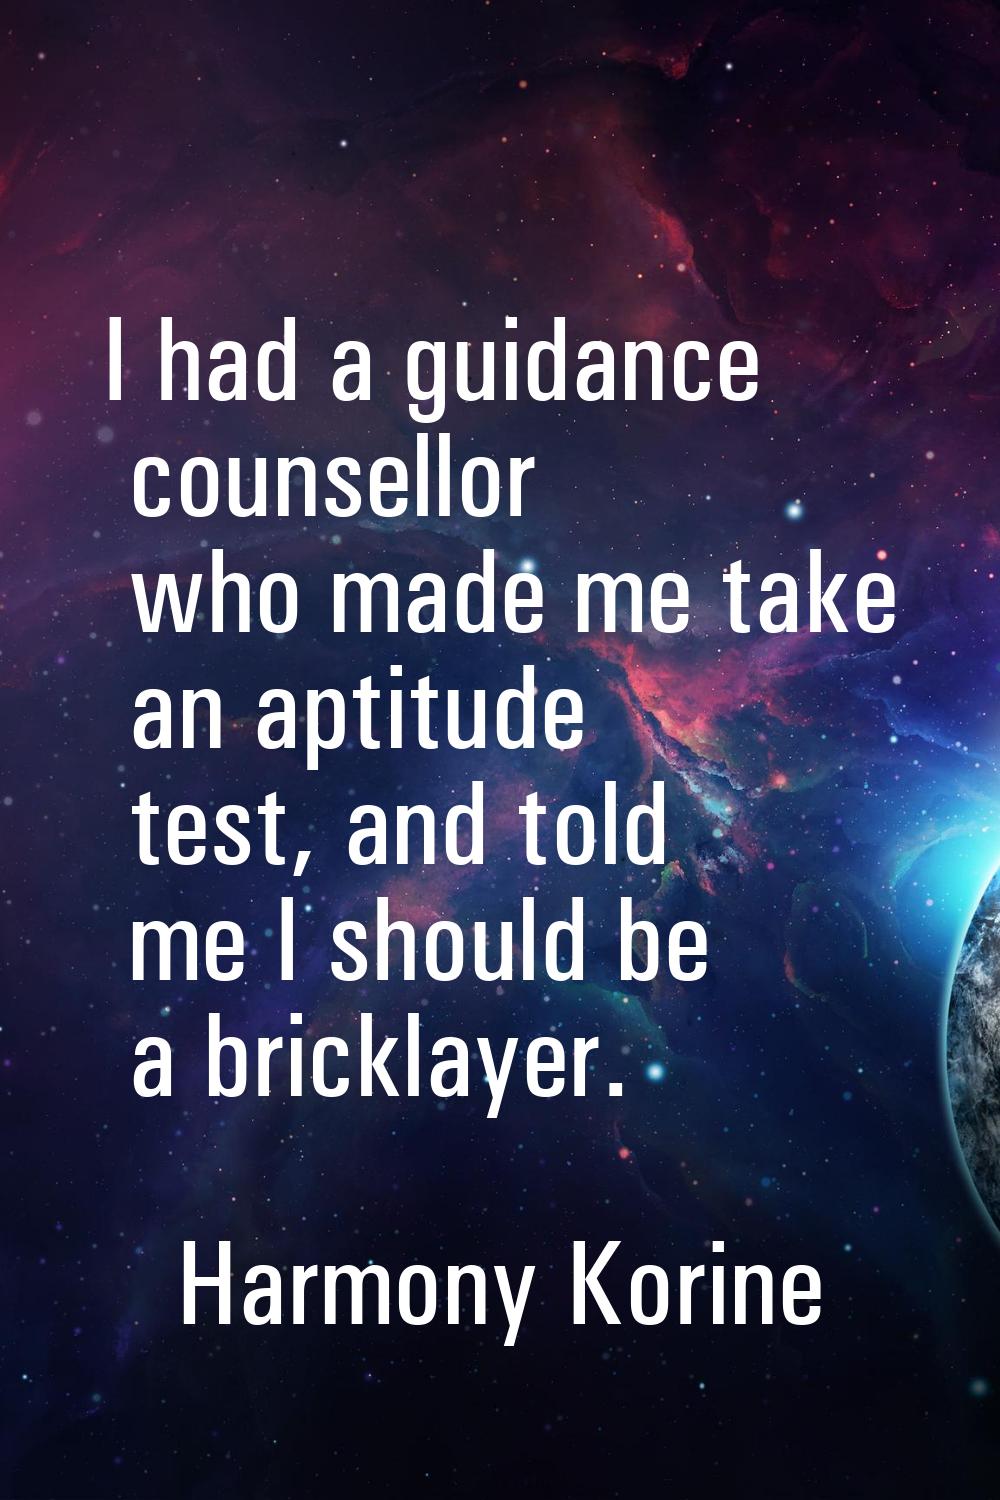 I had a guidance counsellor who made me take an aptitude test, and told me I should be a bricklayer